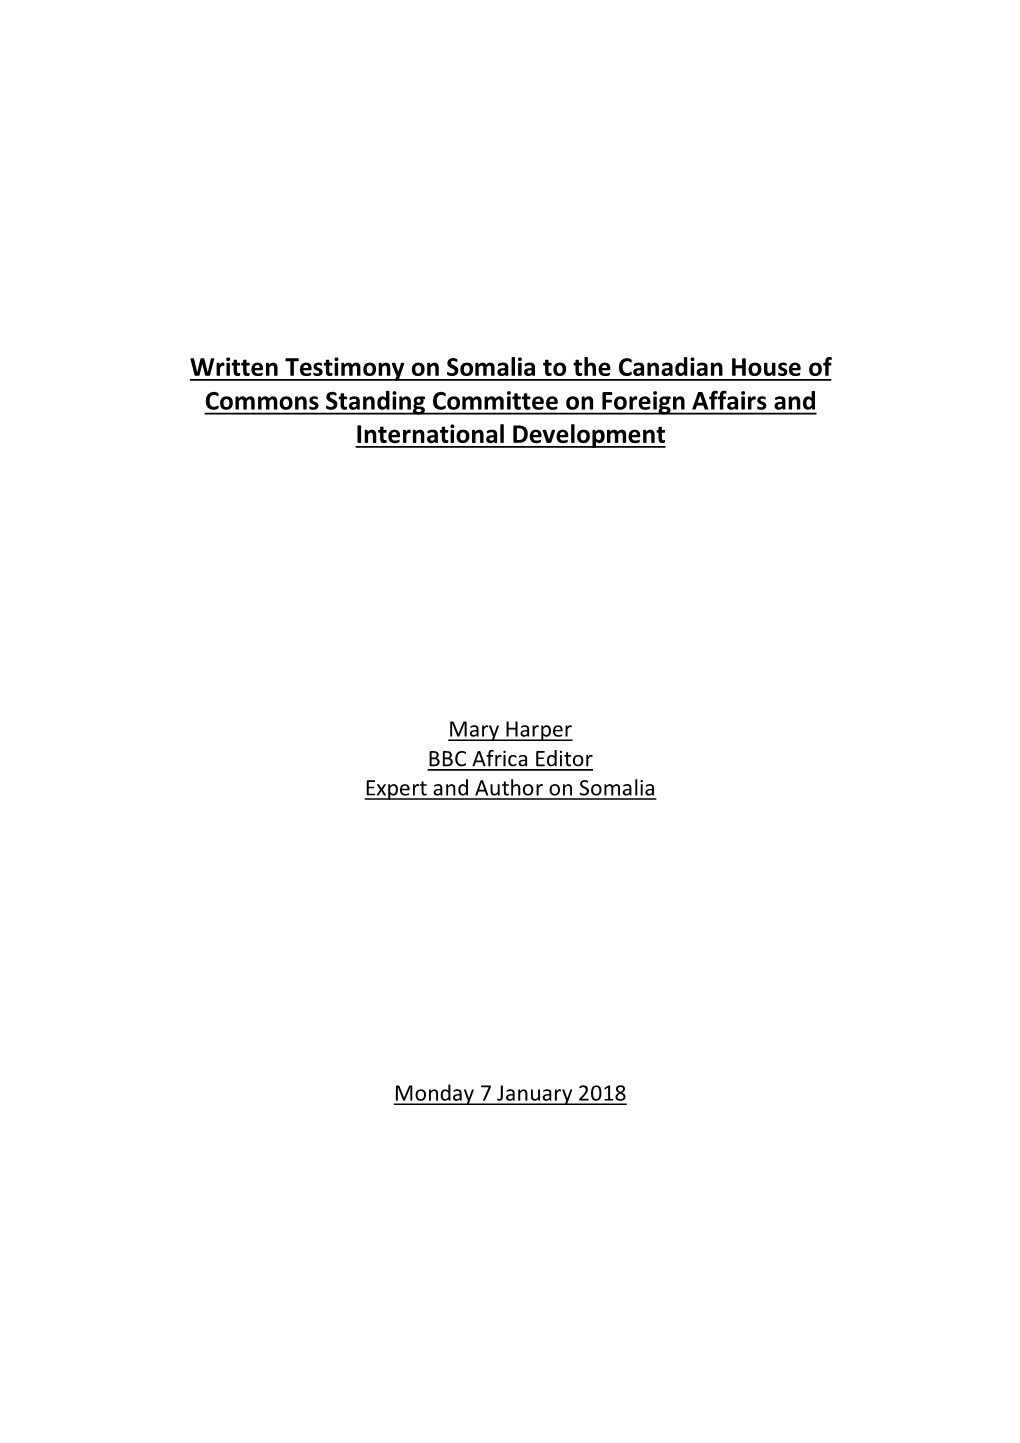 Written Testimony on Somalia to the Canadian House of Commons Standing Committee on Foreign Affairs and International Development